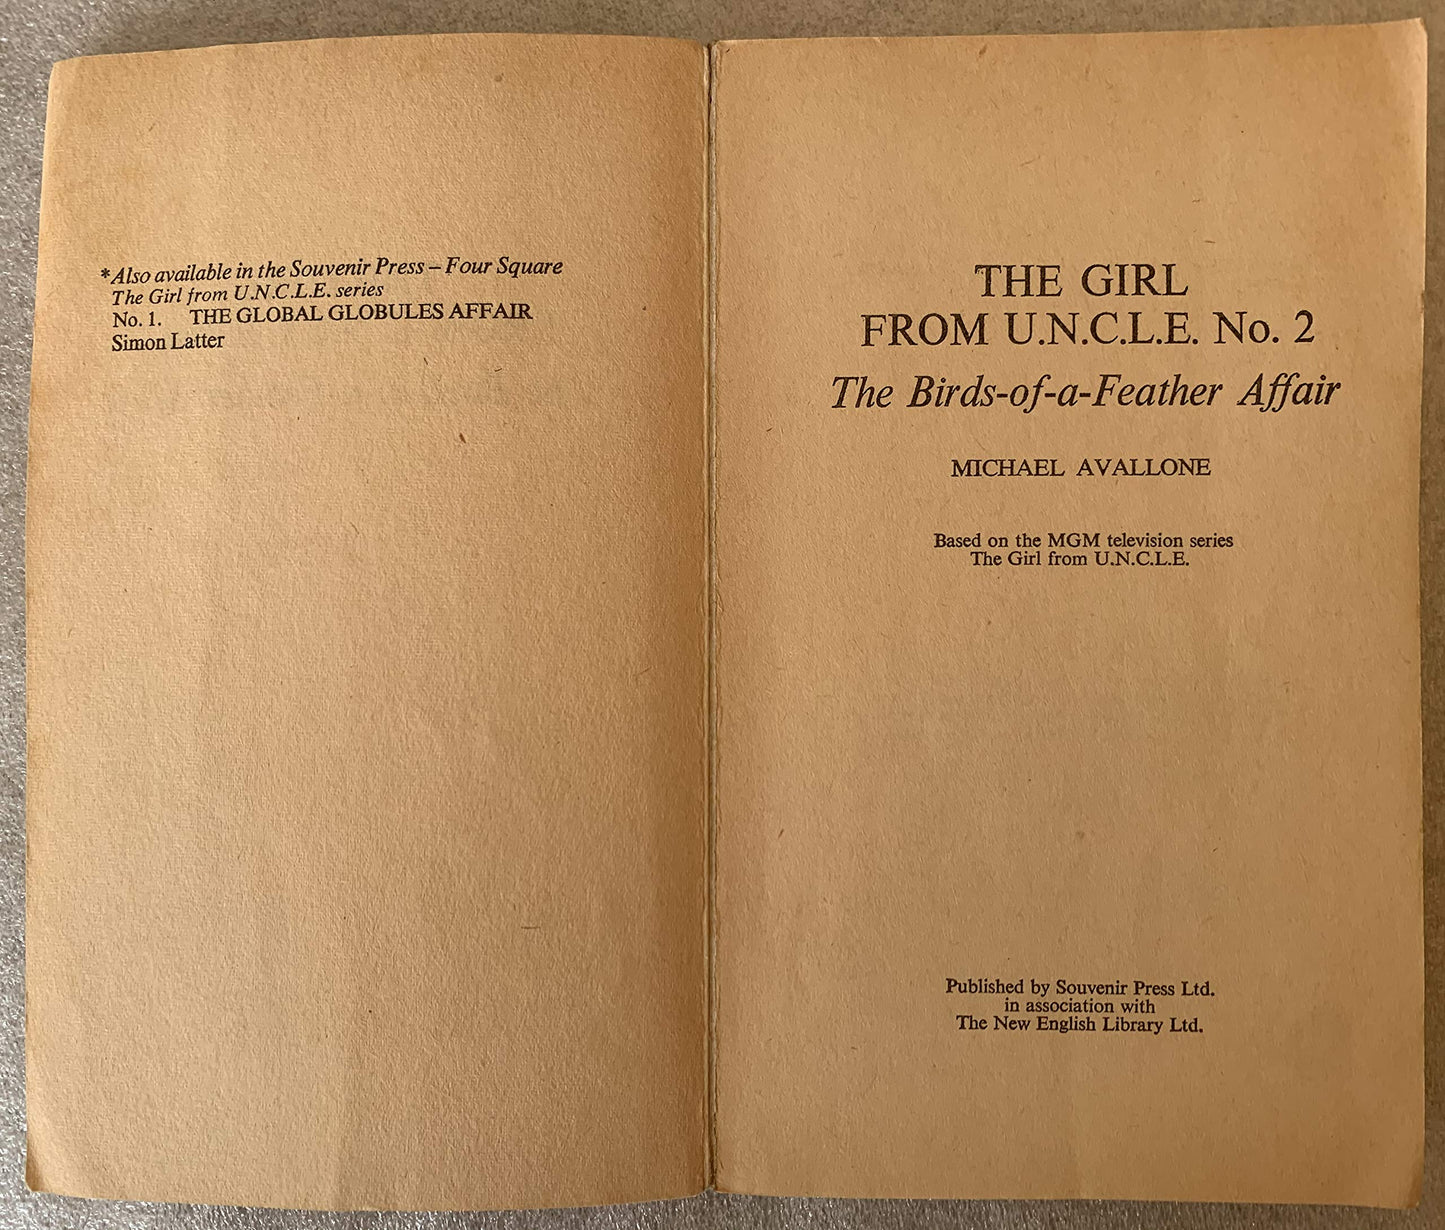 Vintage 1967 The Girl From UNCLE No. 2 The Birds Of A Feather Affair Paperback Novel By Michael Avallone